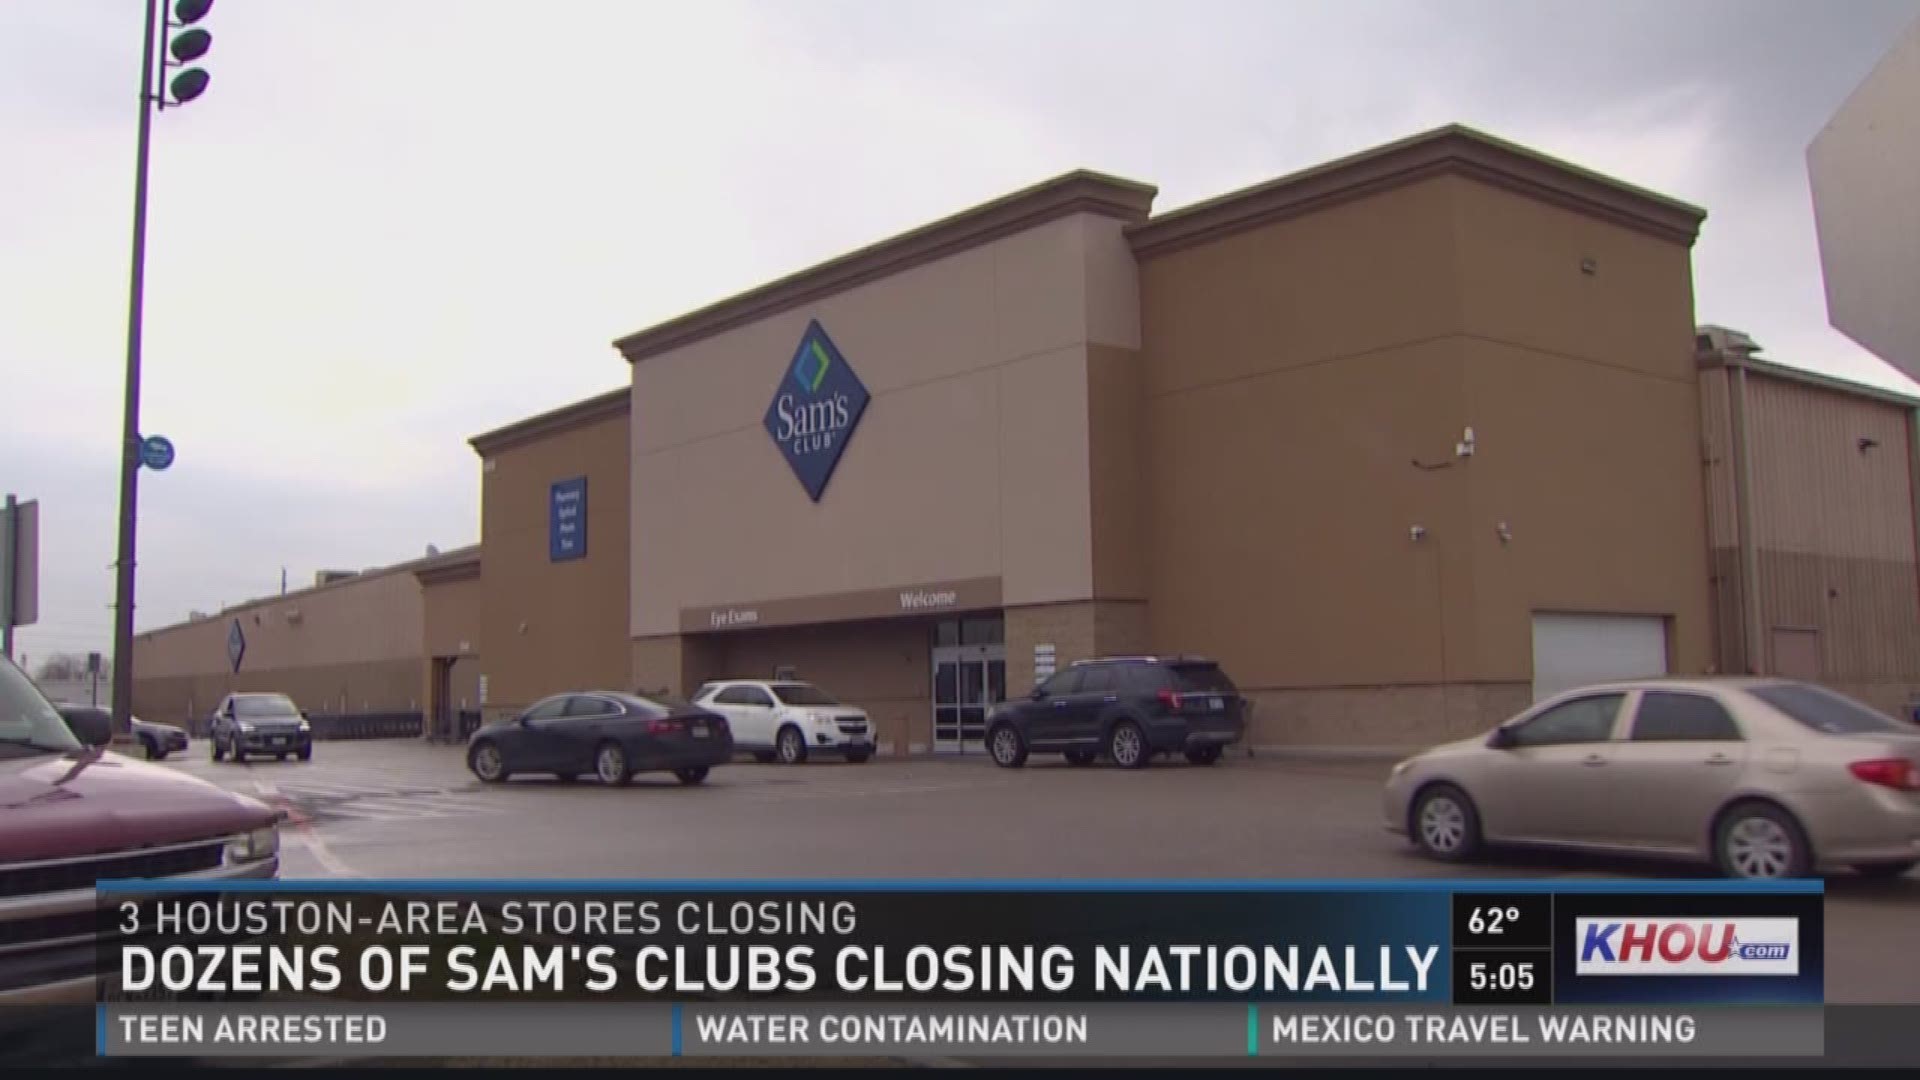 Dozens of Sam's Club stores across the nation suddenly closed Thursday. Three of them are in the Houston area, including the store near NRG Park.